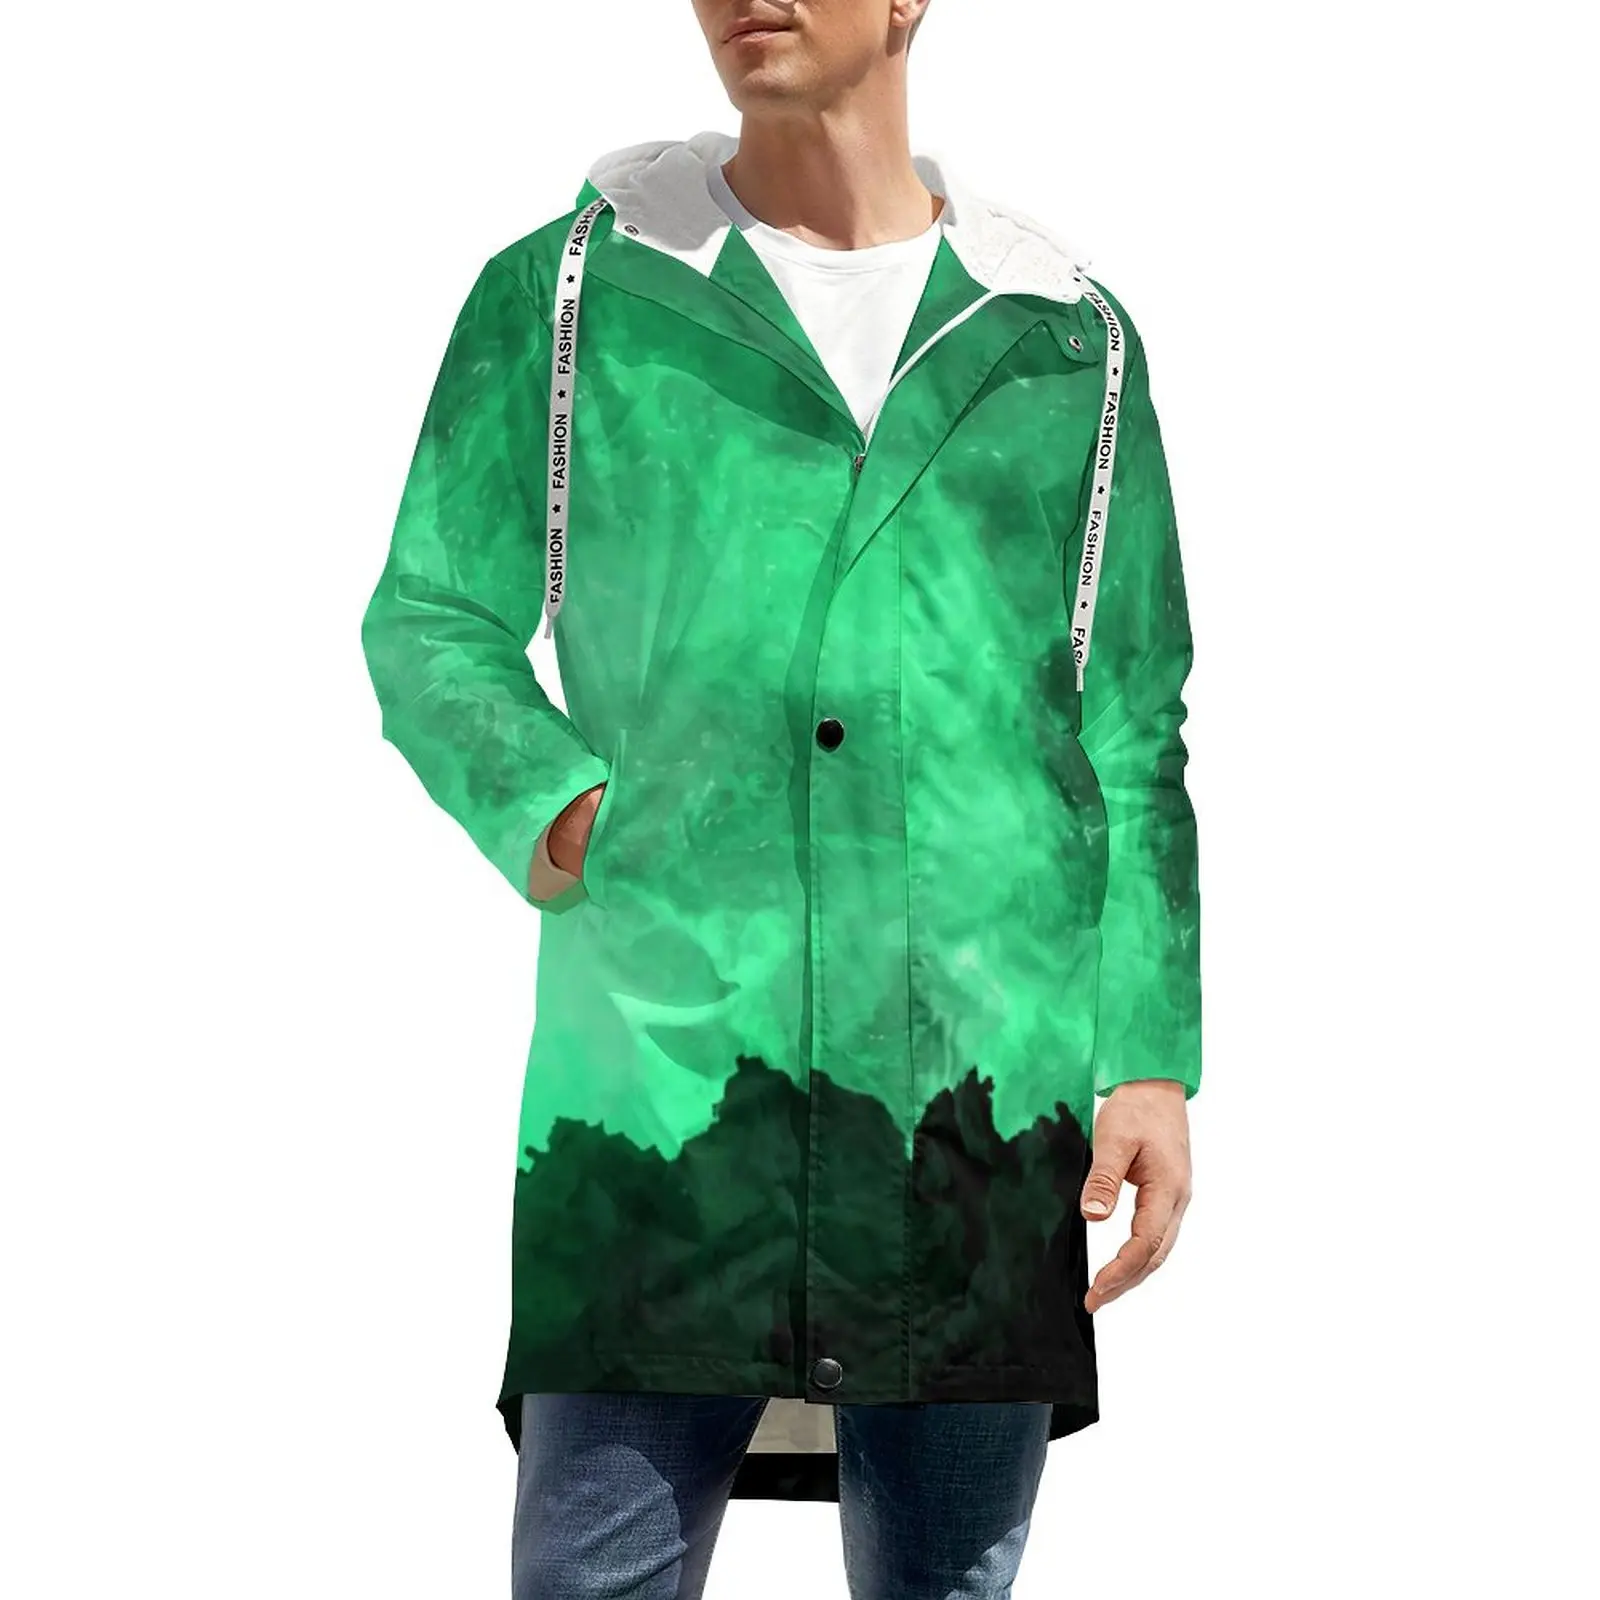 

Green Mountain Trench Coats Abstract Marble Print Outerwear Casual Warm Windbreakers Mens Kawaii Zipper Winter Jackets Plus Size